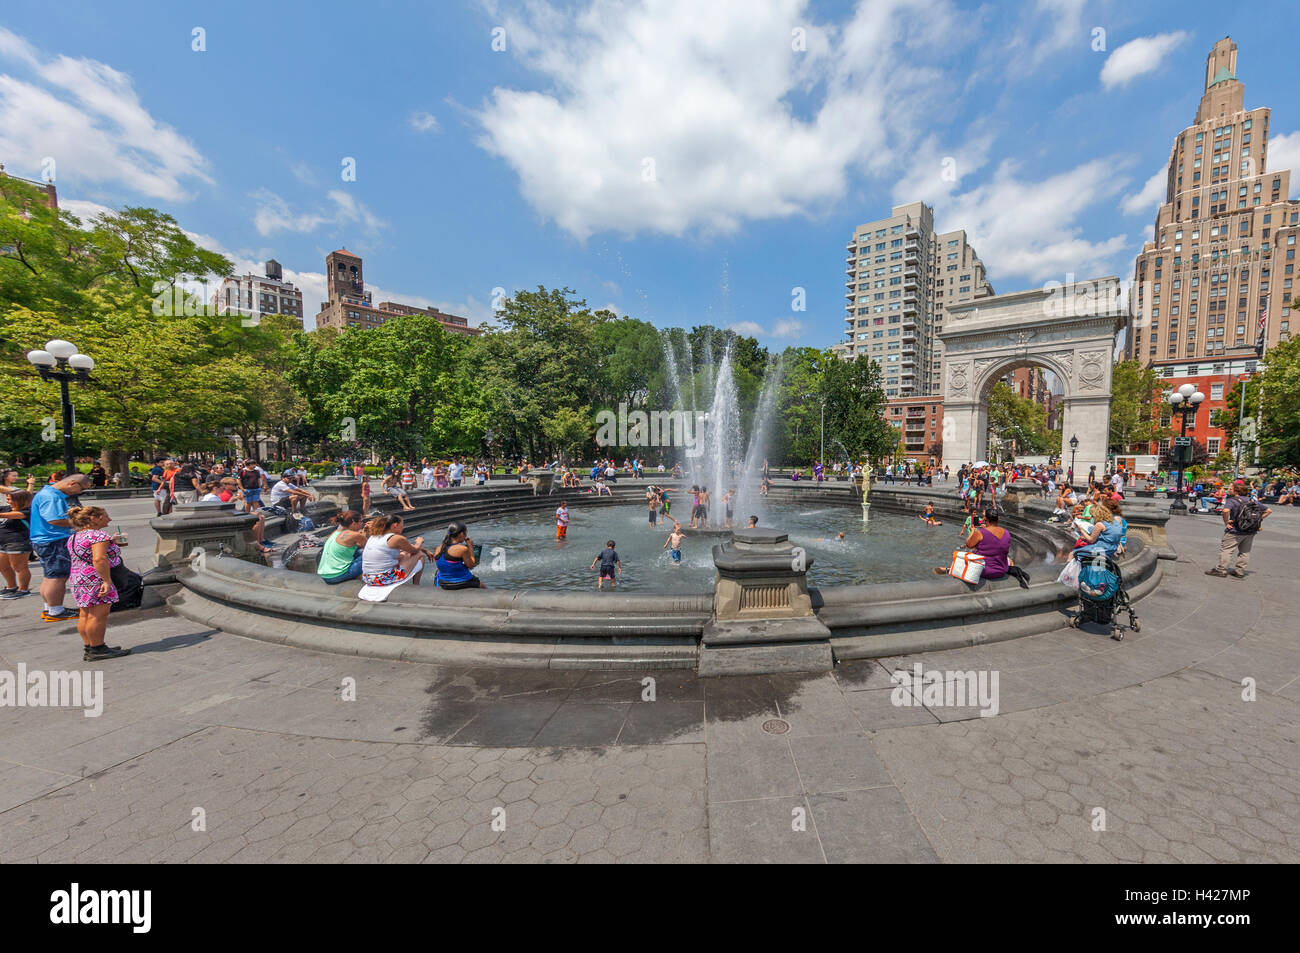 Washington Square Park Arch in New York City and people playing in the water fountain. Stock Photo